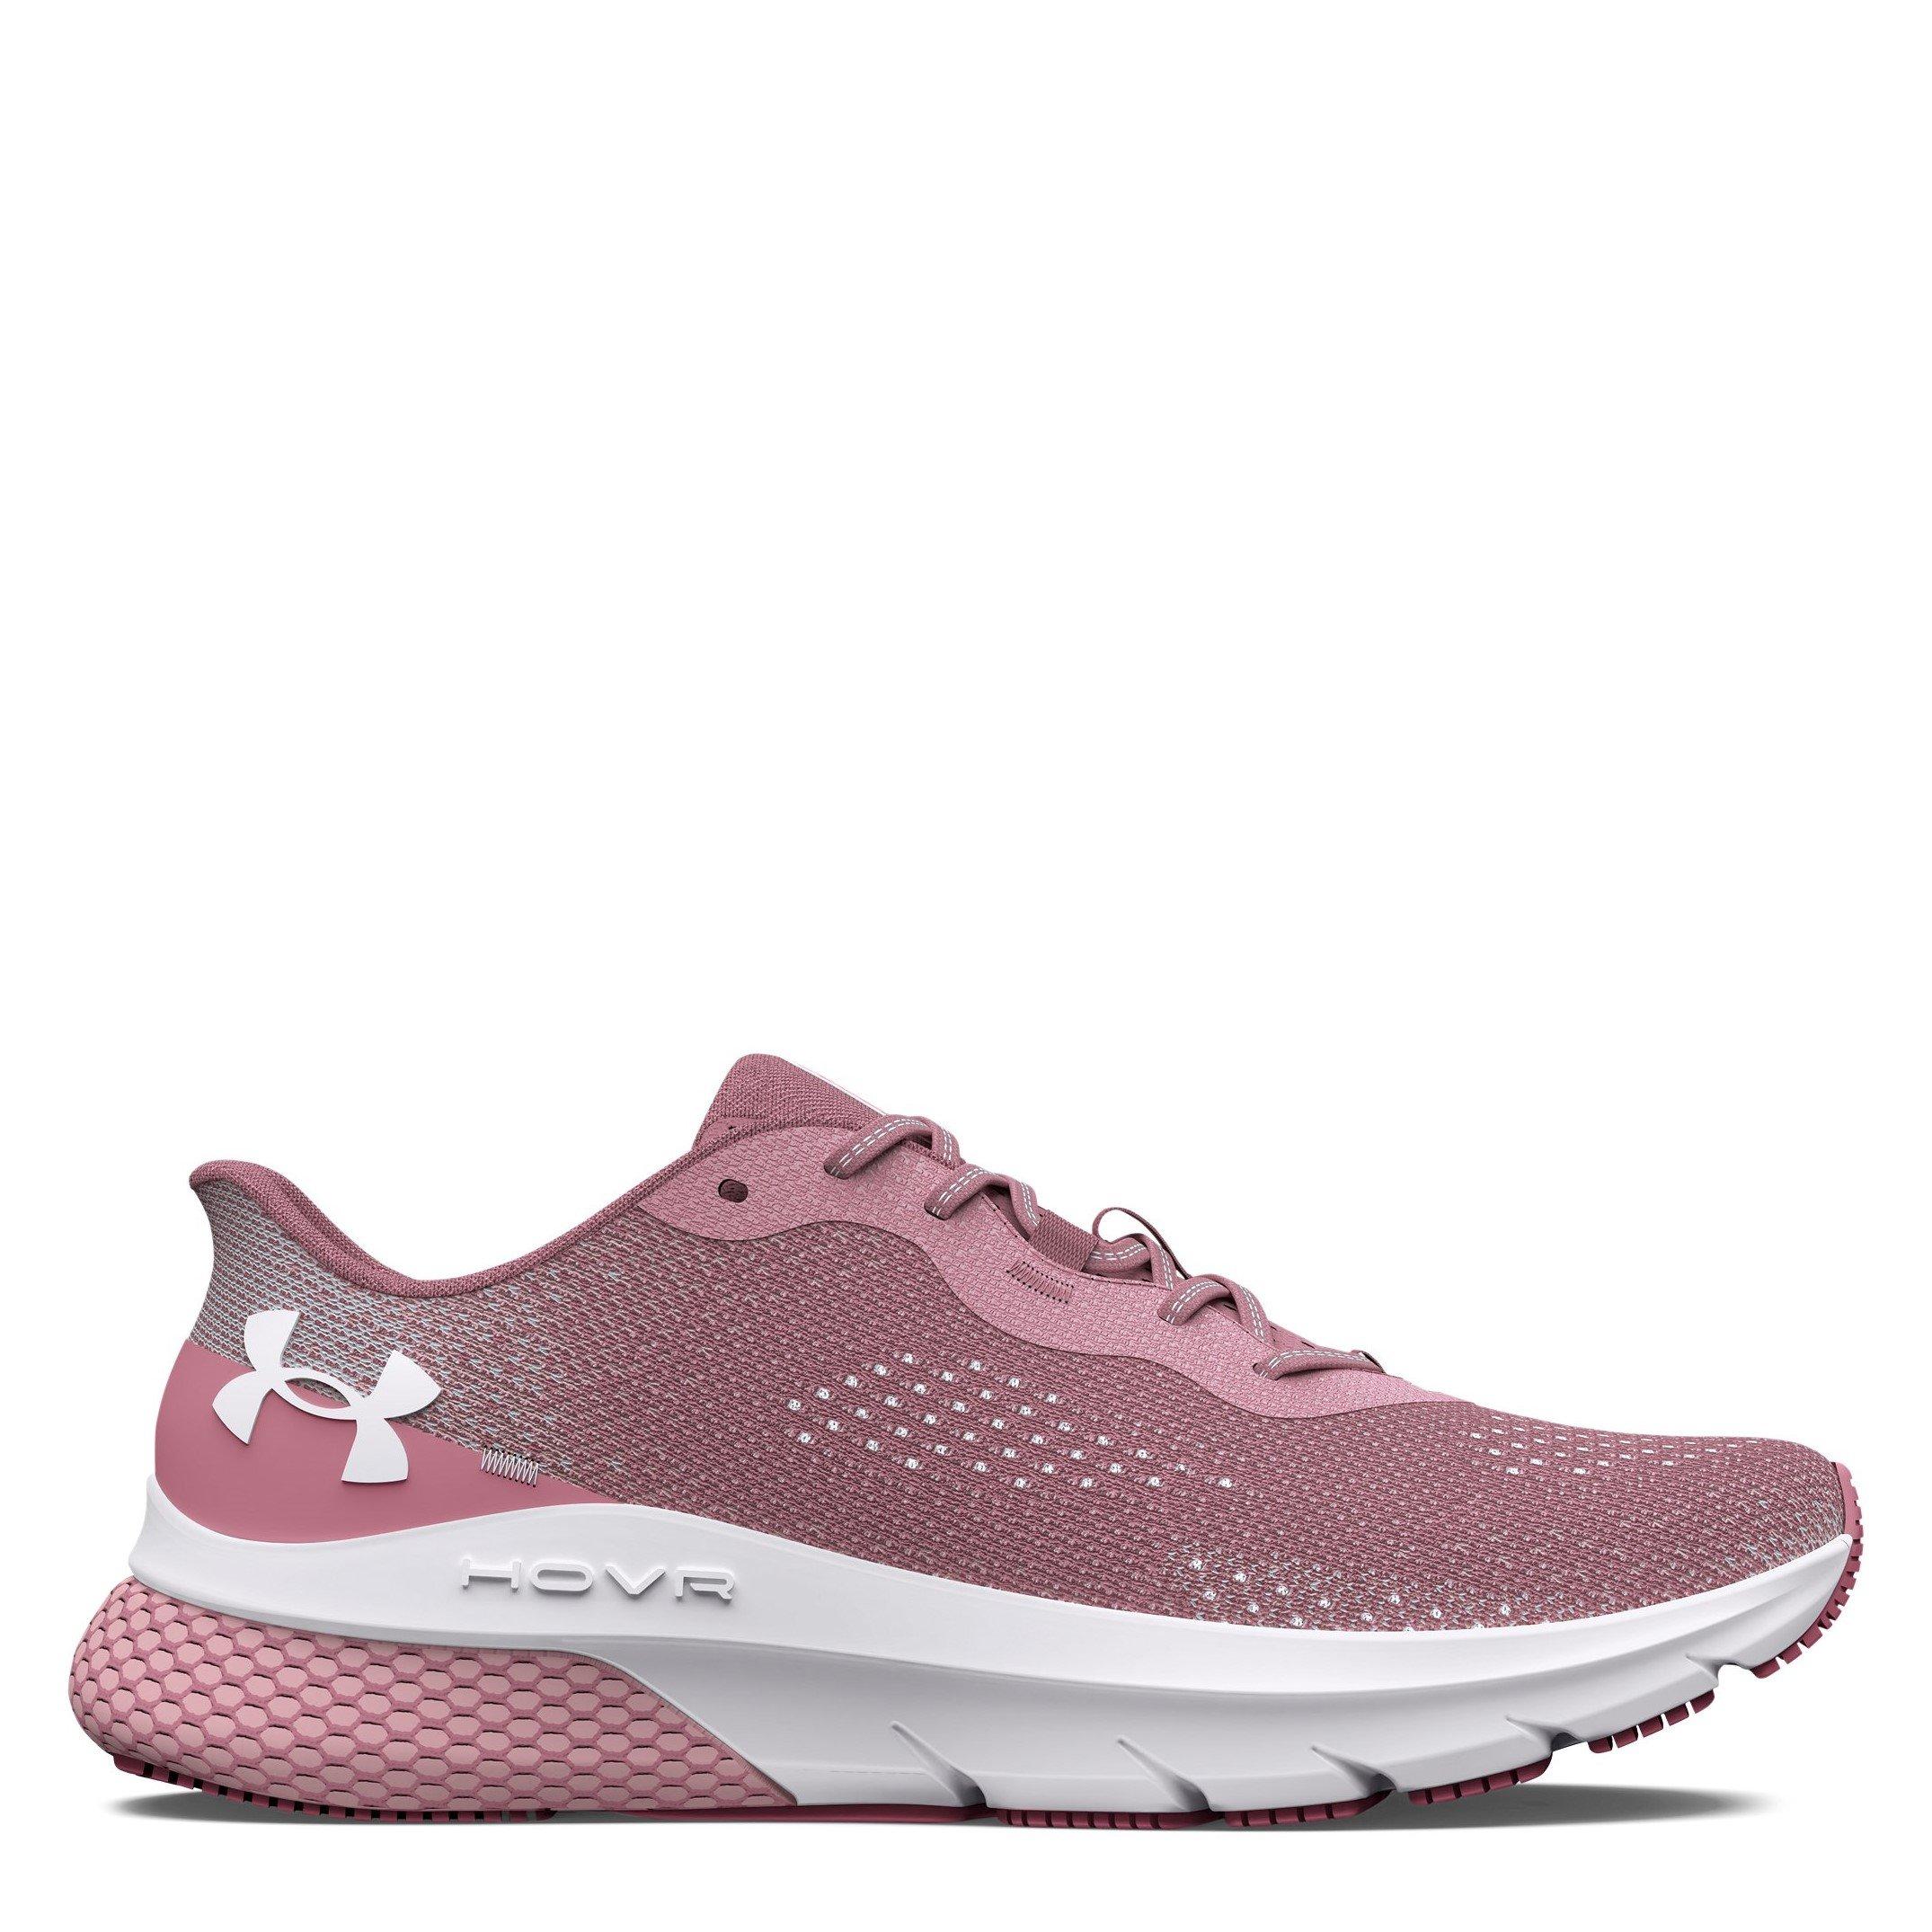 Under Armour | W HOVR Turbulence 2 | Everyday Neutral Road Running ...